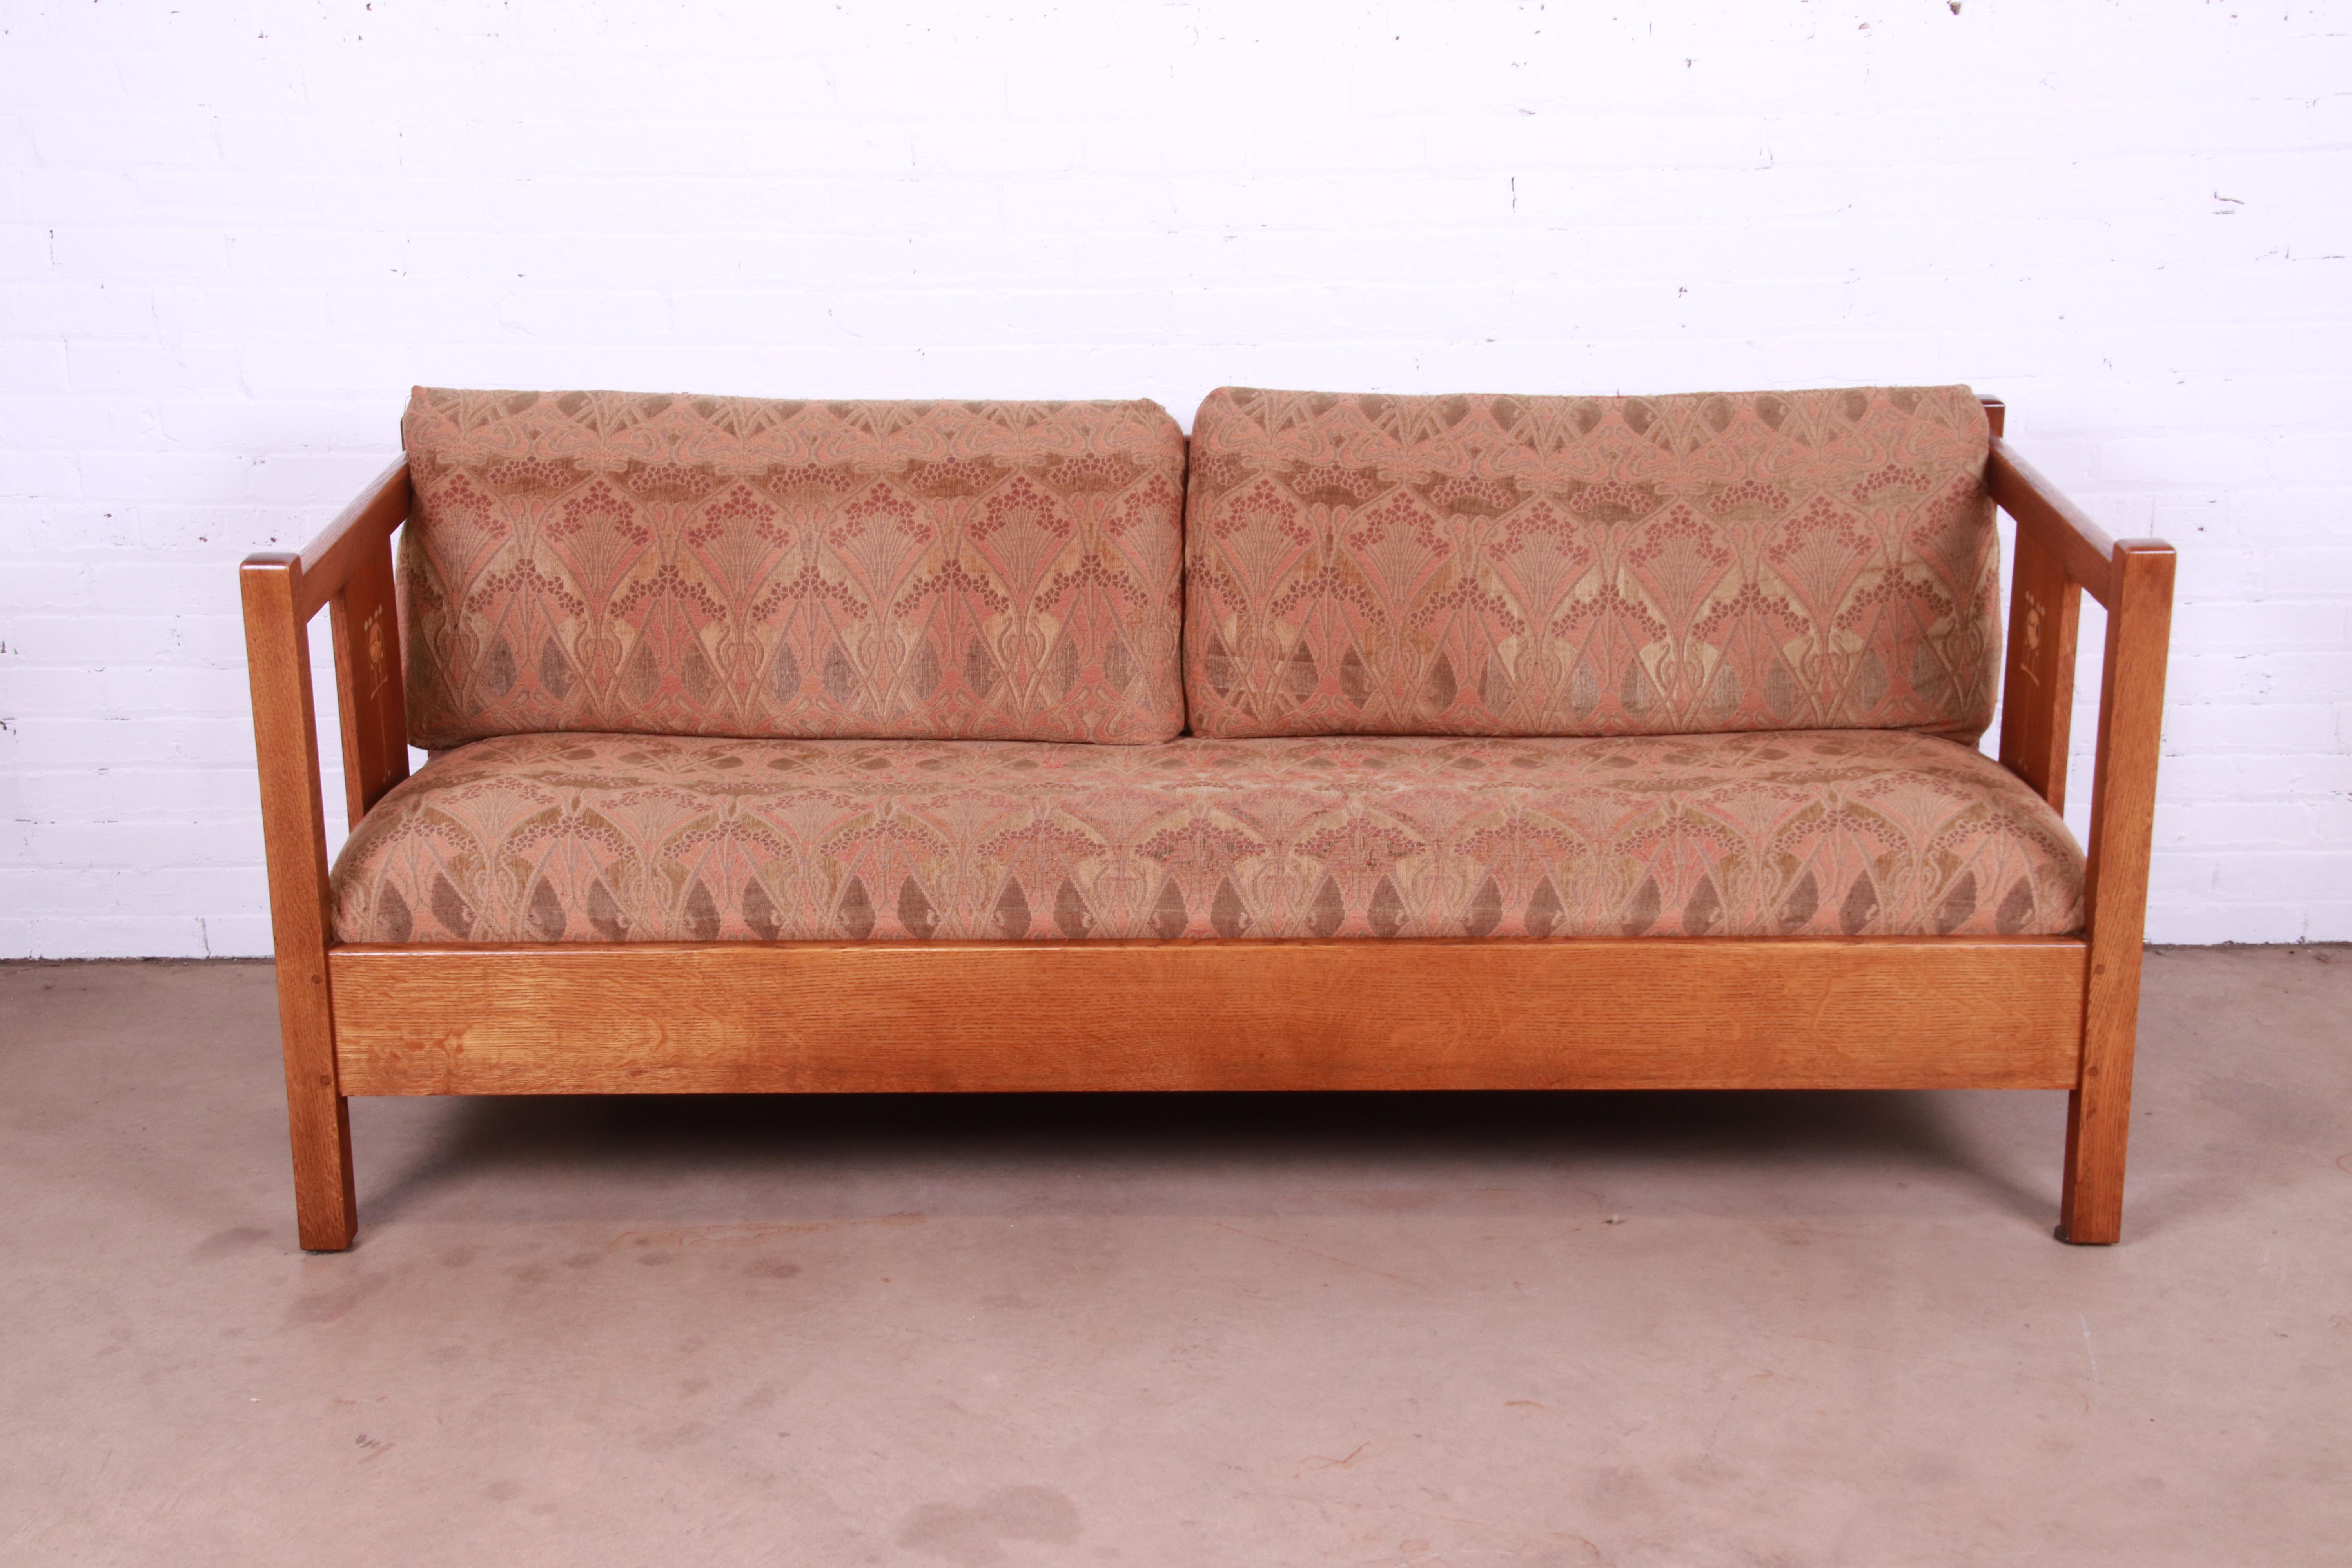 A gorgeous Mission or Arts & Crafts style sofa

By Stickley, 